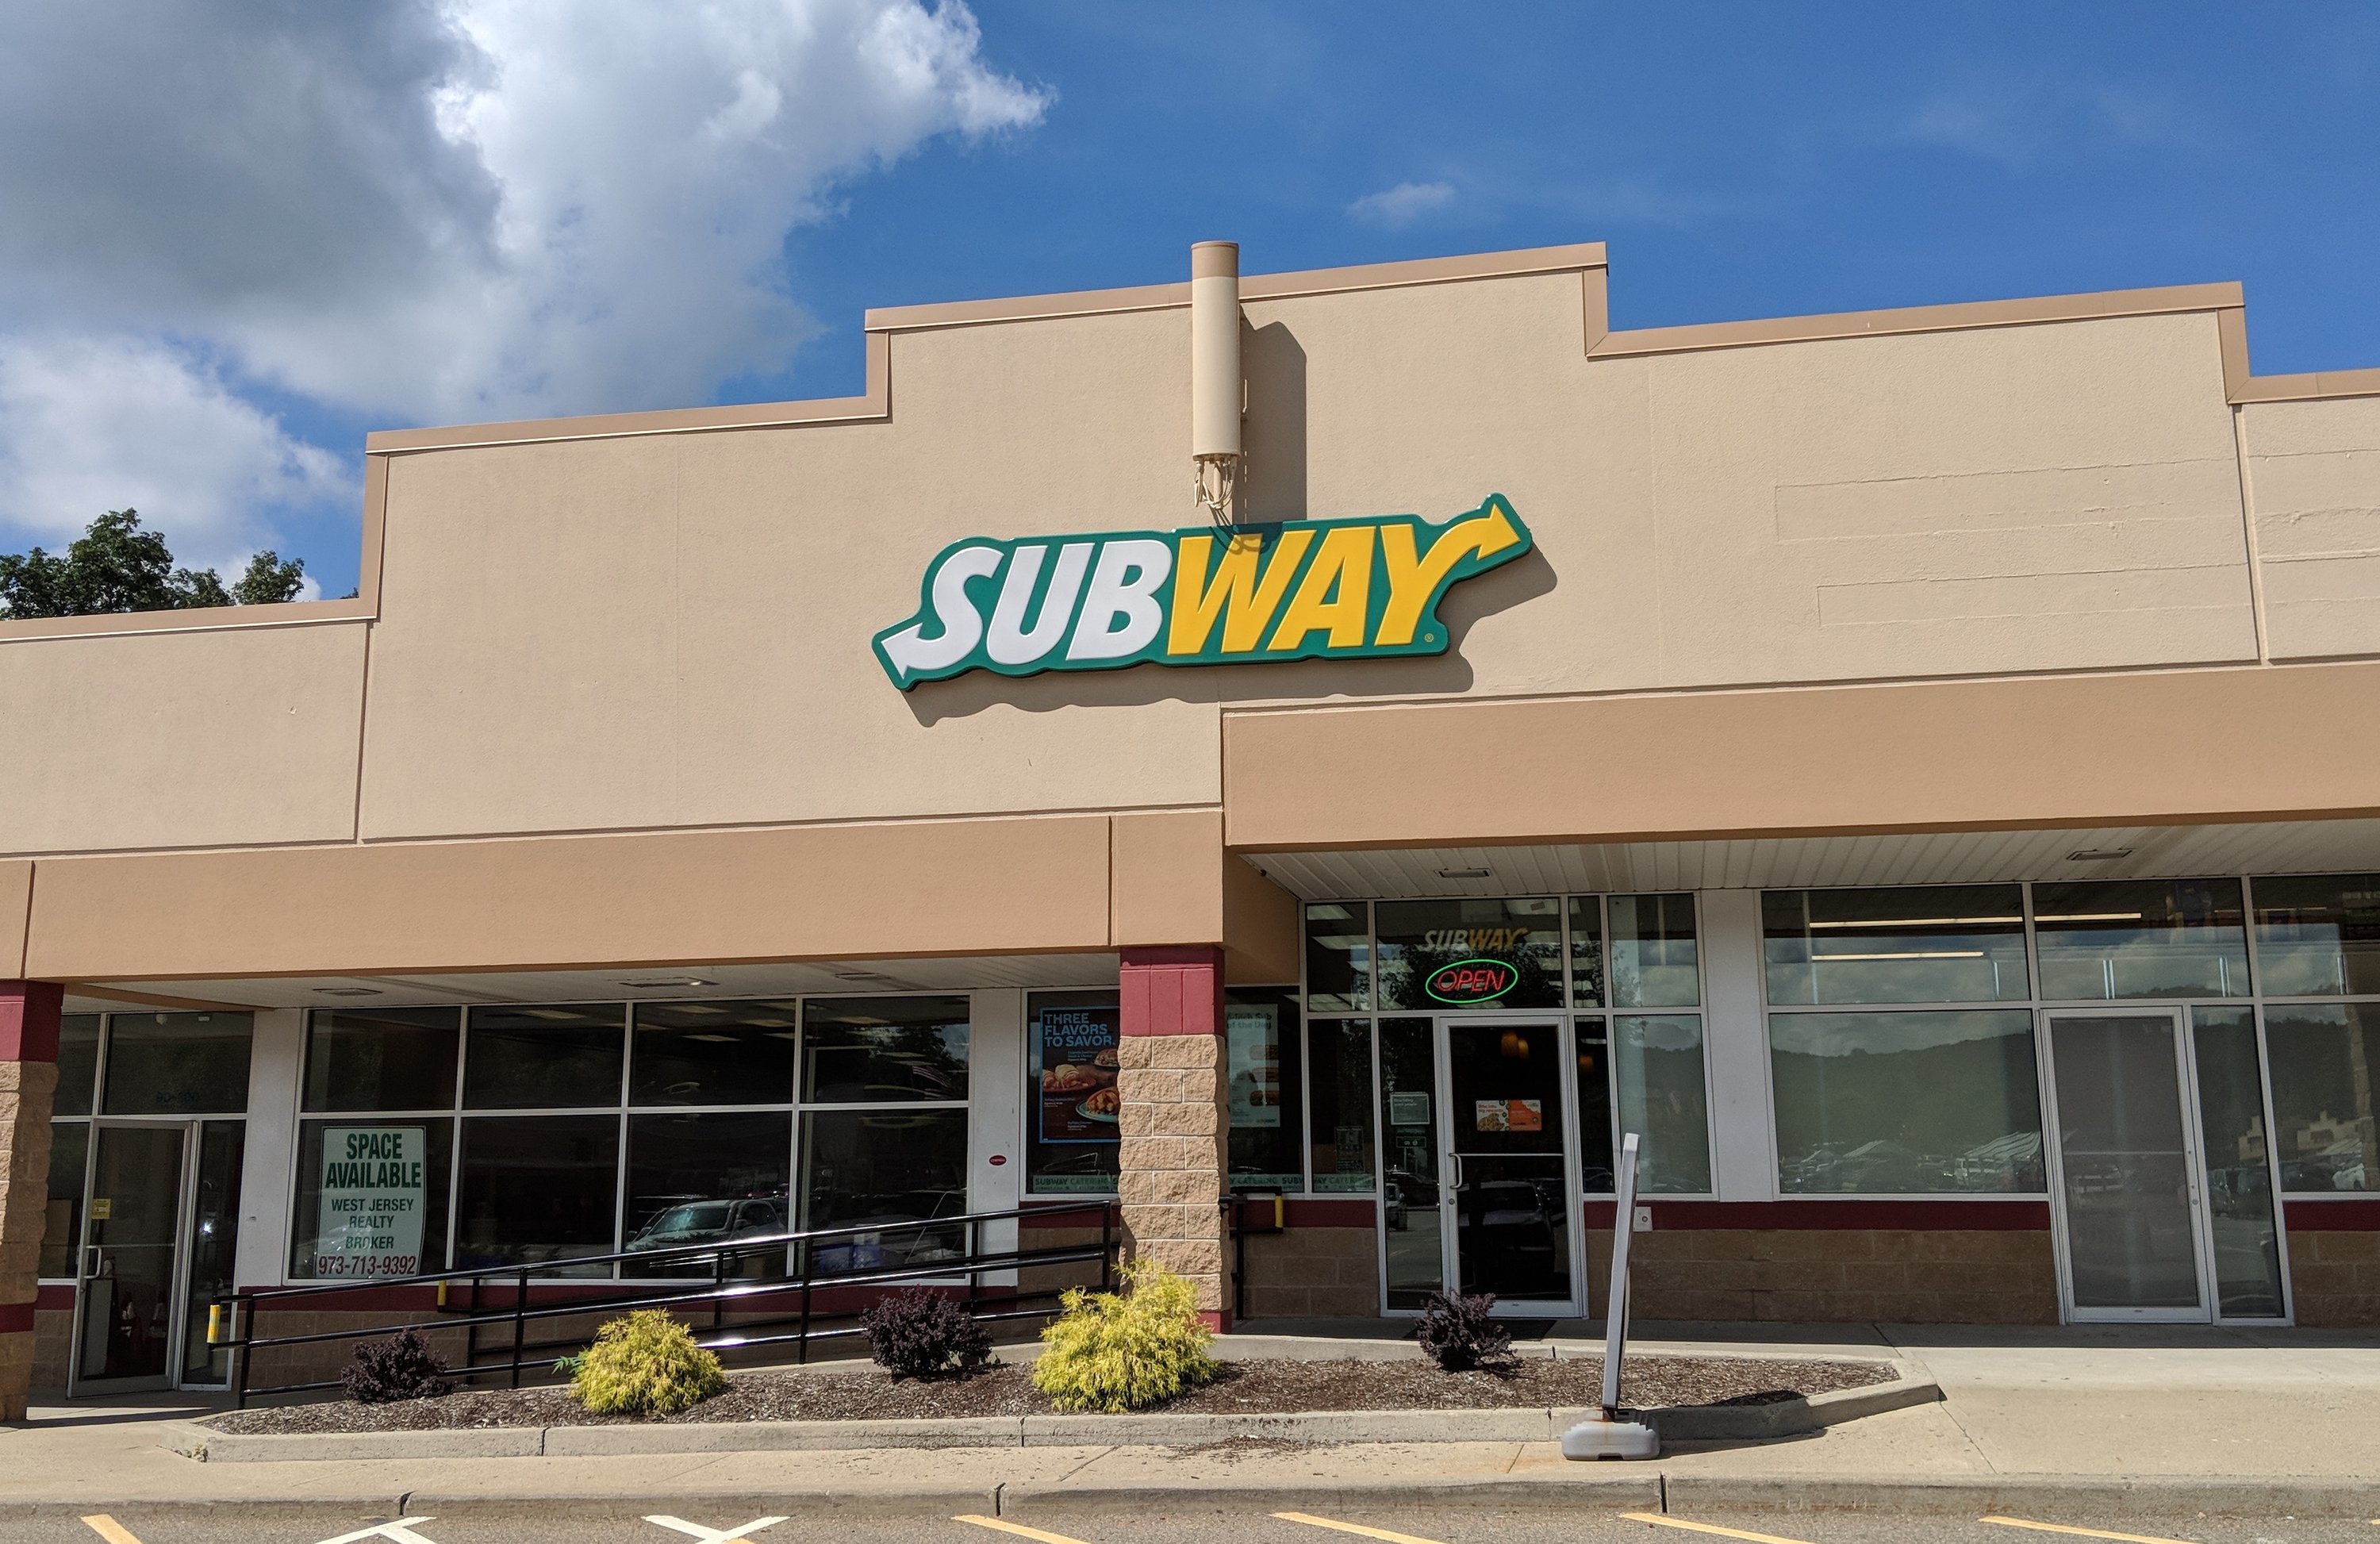 The Real Reason Subway Employees Make Food In Front Of Customers